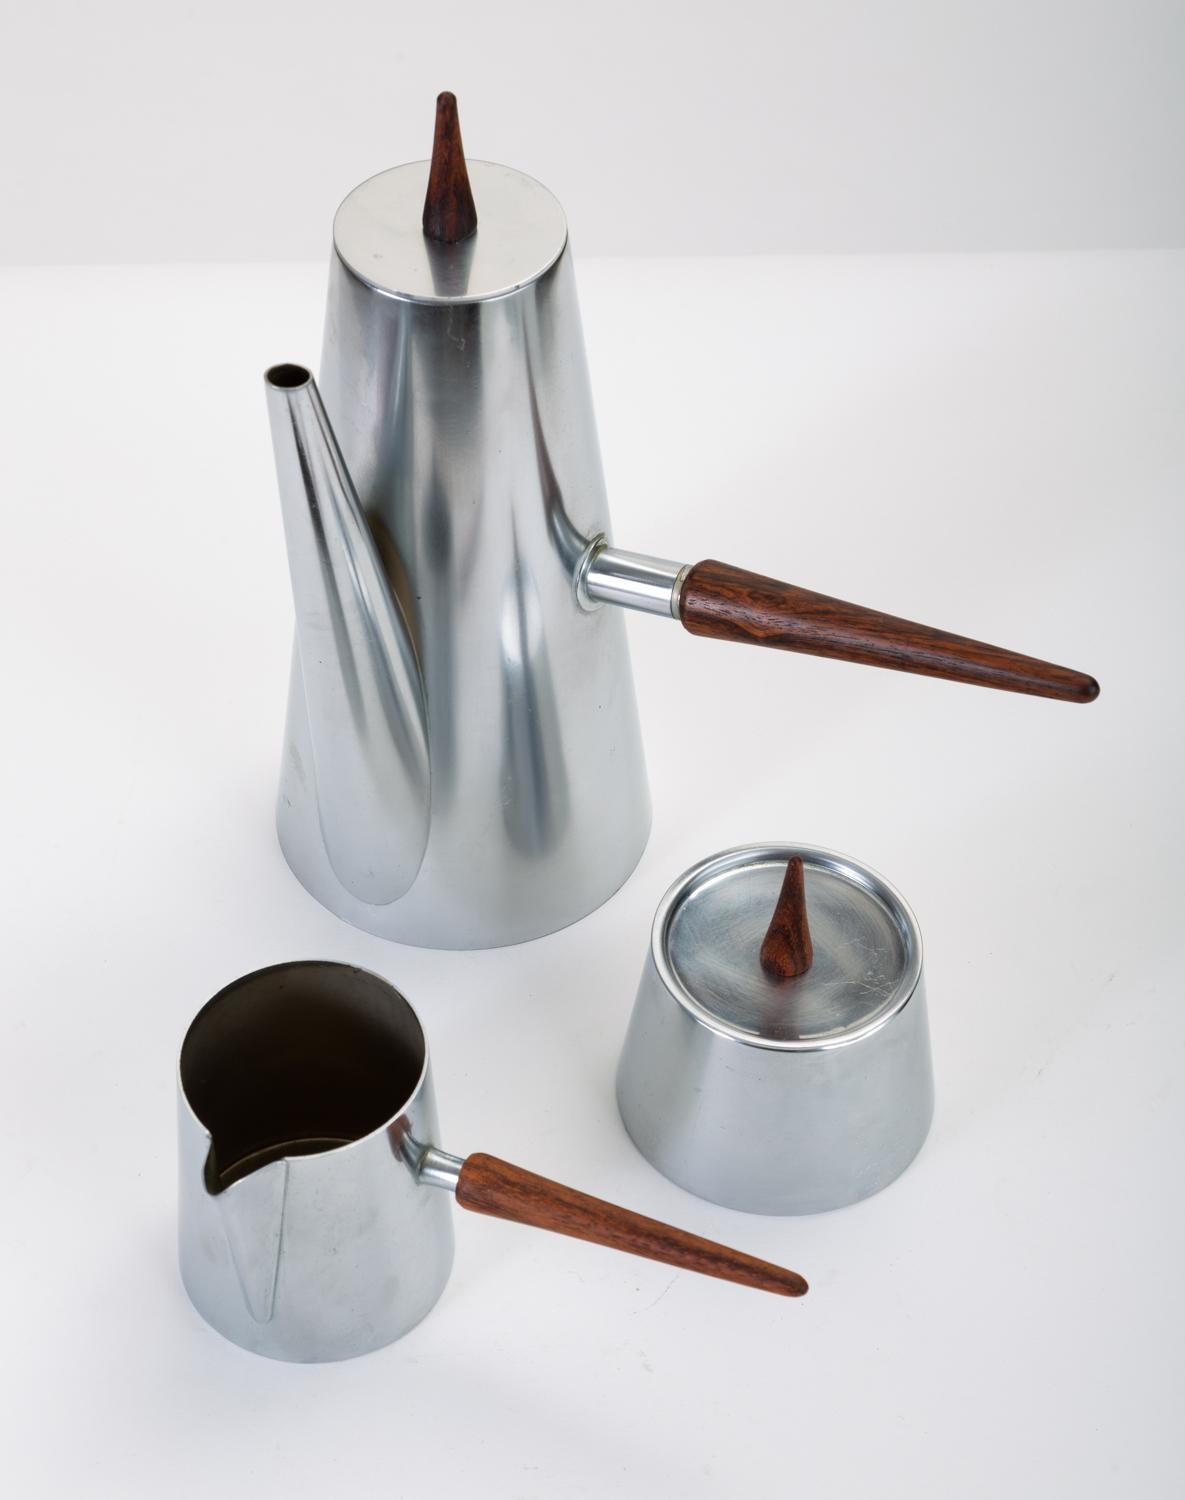 A three-piece coffee service in stainless steel comprising a coffee or teapot, pitcher for cream, and sugar bowl with lid. Each item has a uniform, tapered silhouette with long conical handles in turned rosewood. Stamped “Made in Italy” on